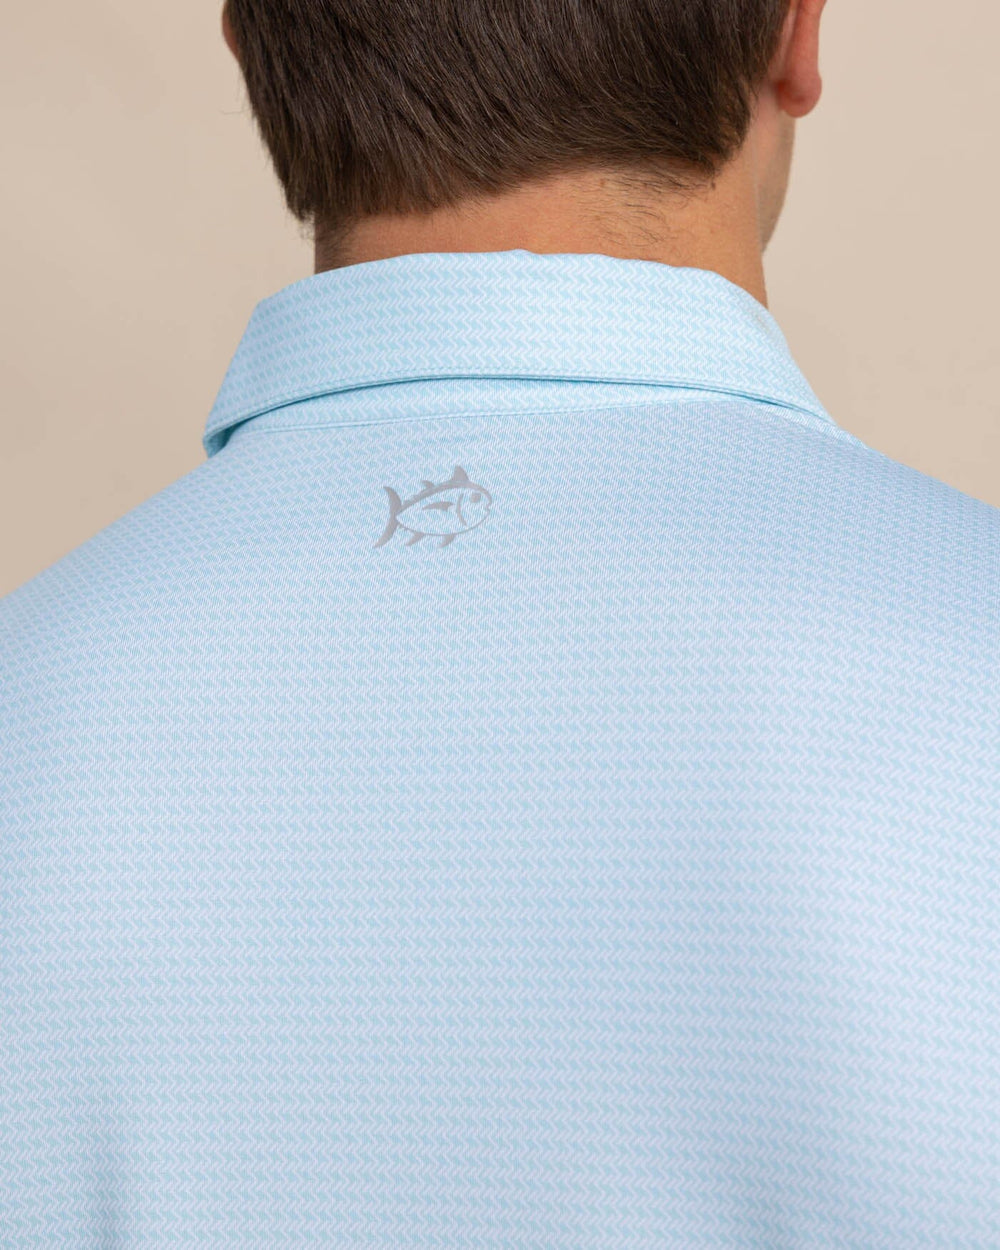 The detail view of the Southern Tide Driver Getting Ziggy With It Printed Polo by Southern Tide - Wake Blue